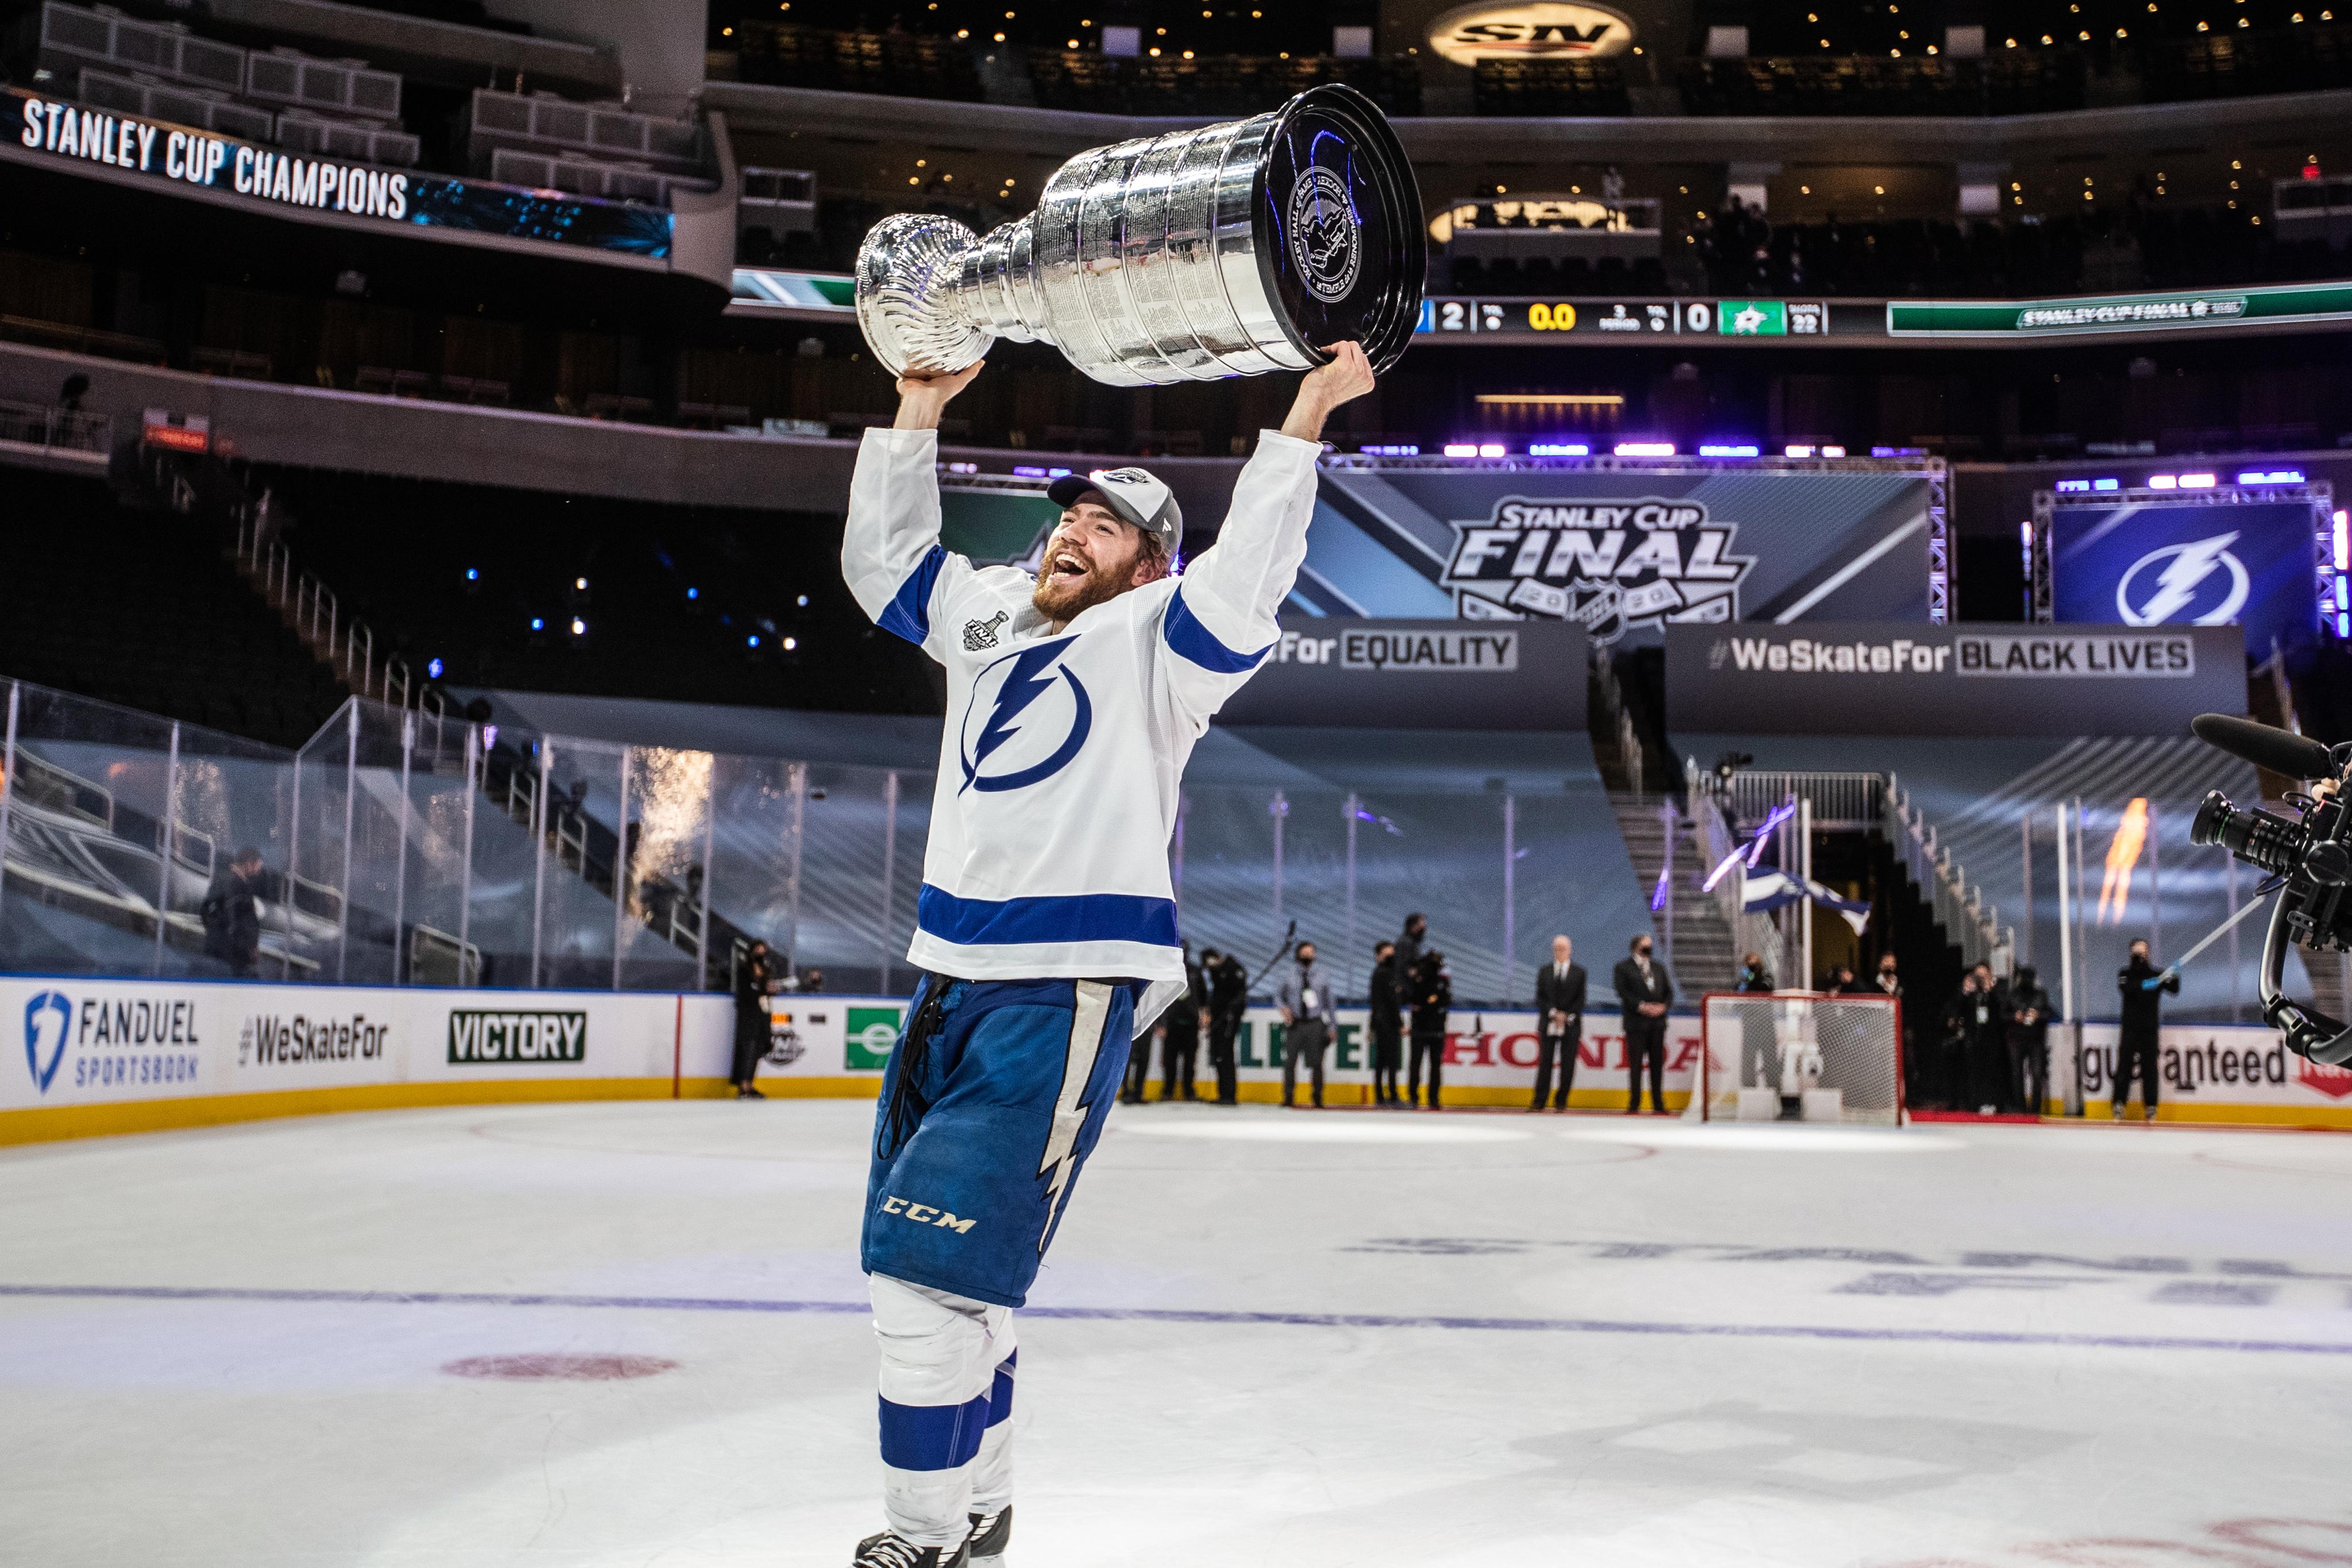 Tampa Bay Lightning defeat Dallas Stars in Game 6 to win Stanley